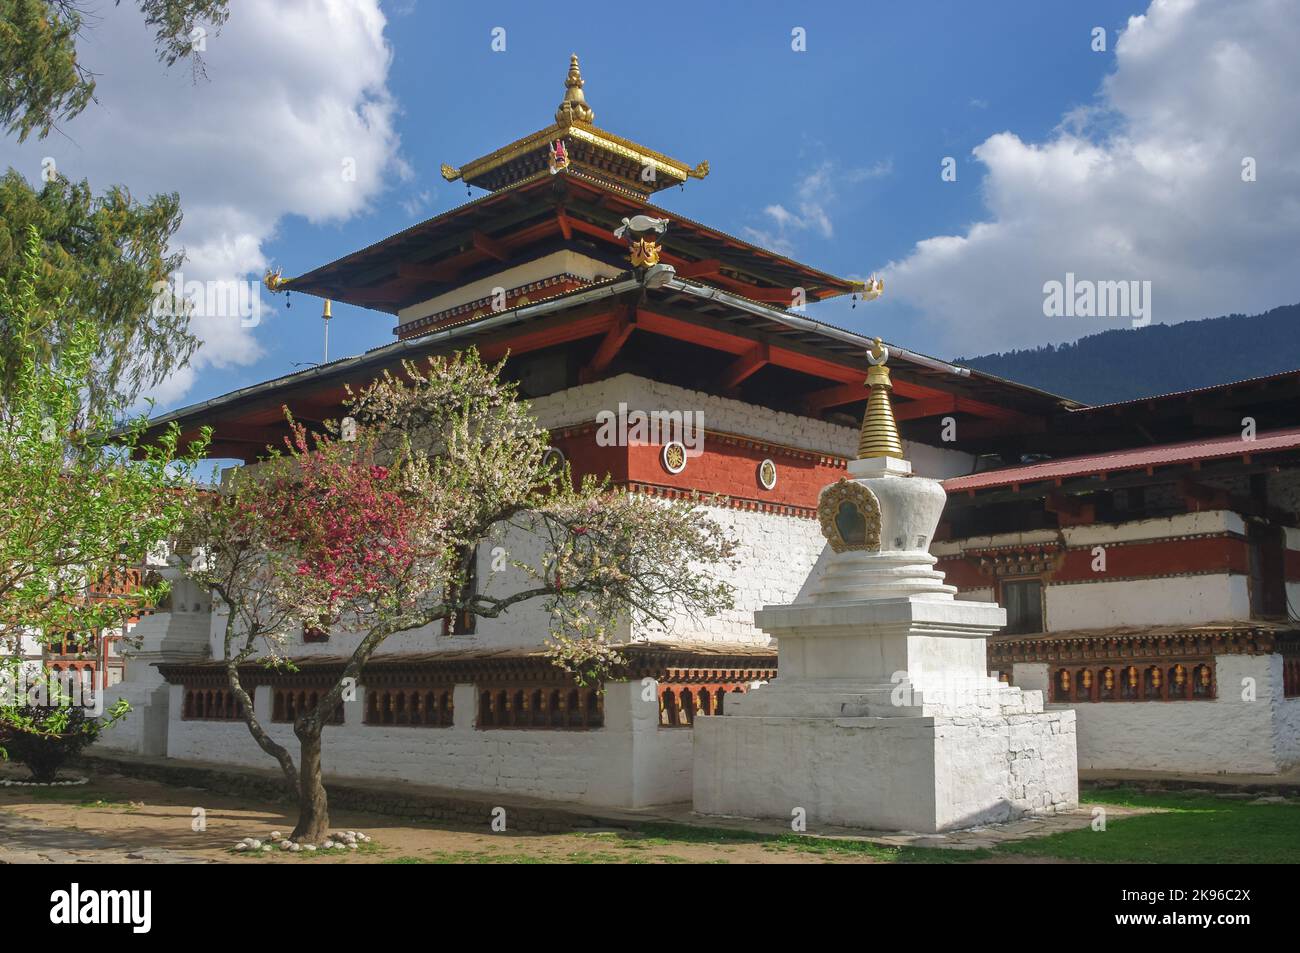 Scenic landscape view of ancient Kyichu lhakhang buddhist monastery in spring with blooming trees, Paro, Western Bhutan Stock Photo